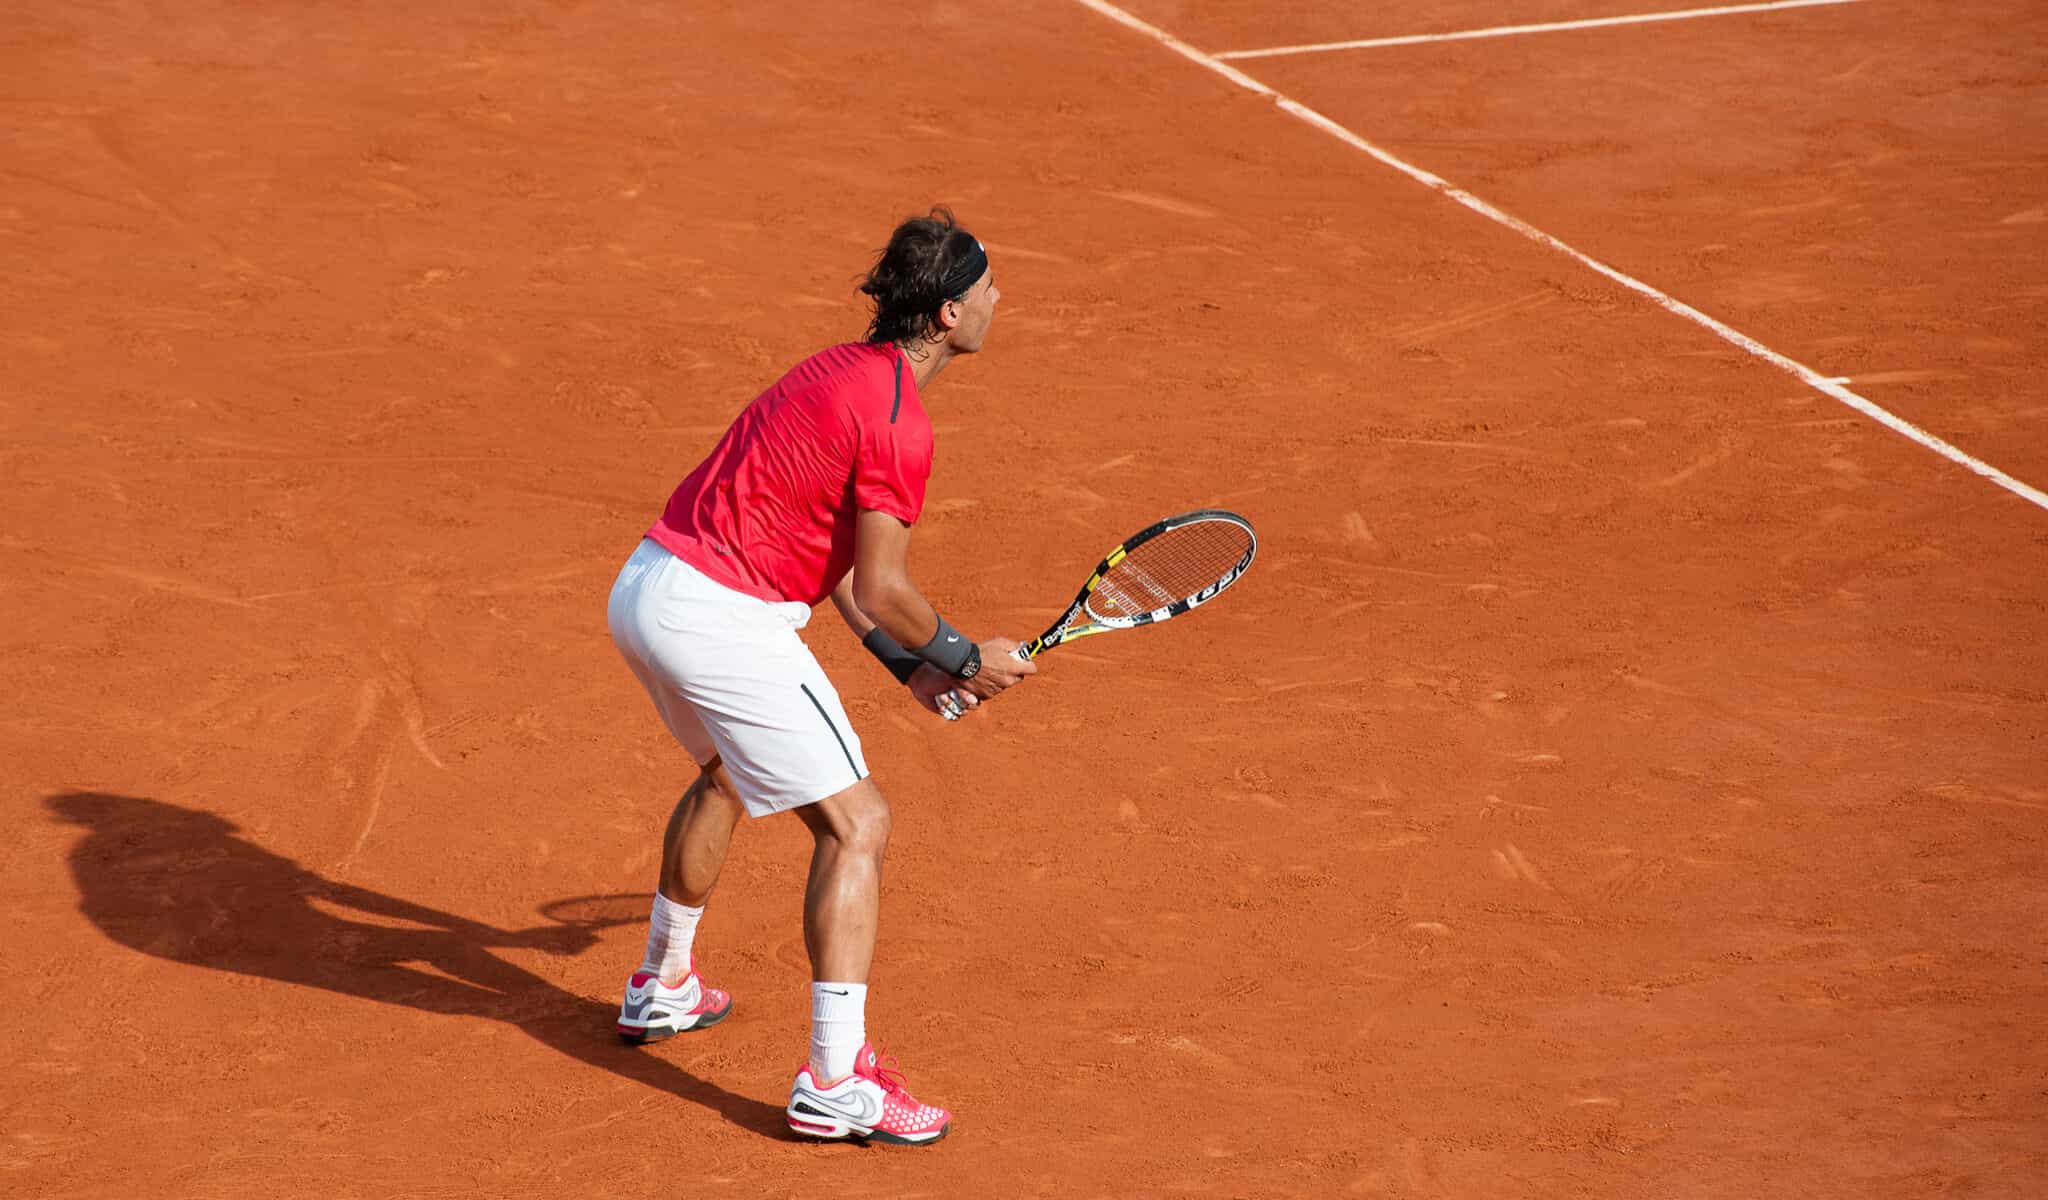 Rafal Nadal plays at the French open in red shirt and white shorts, on the iconic orange clay courts.